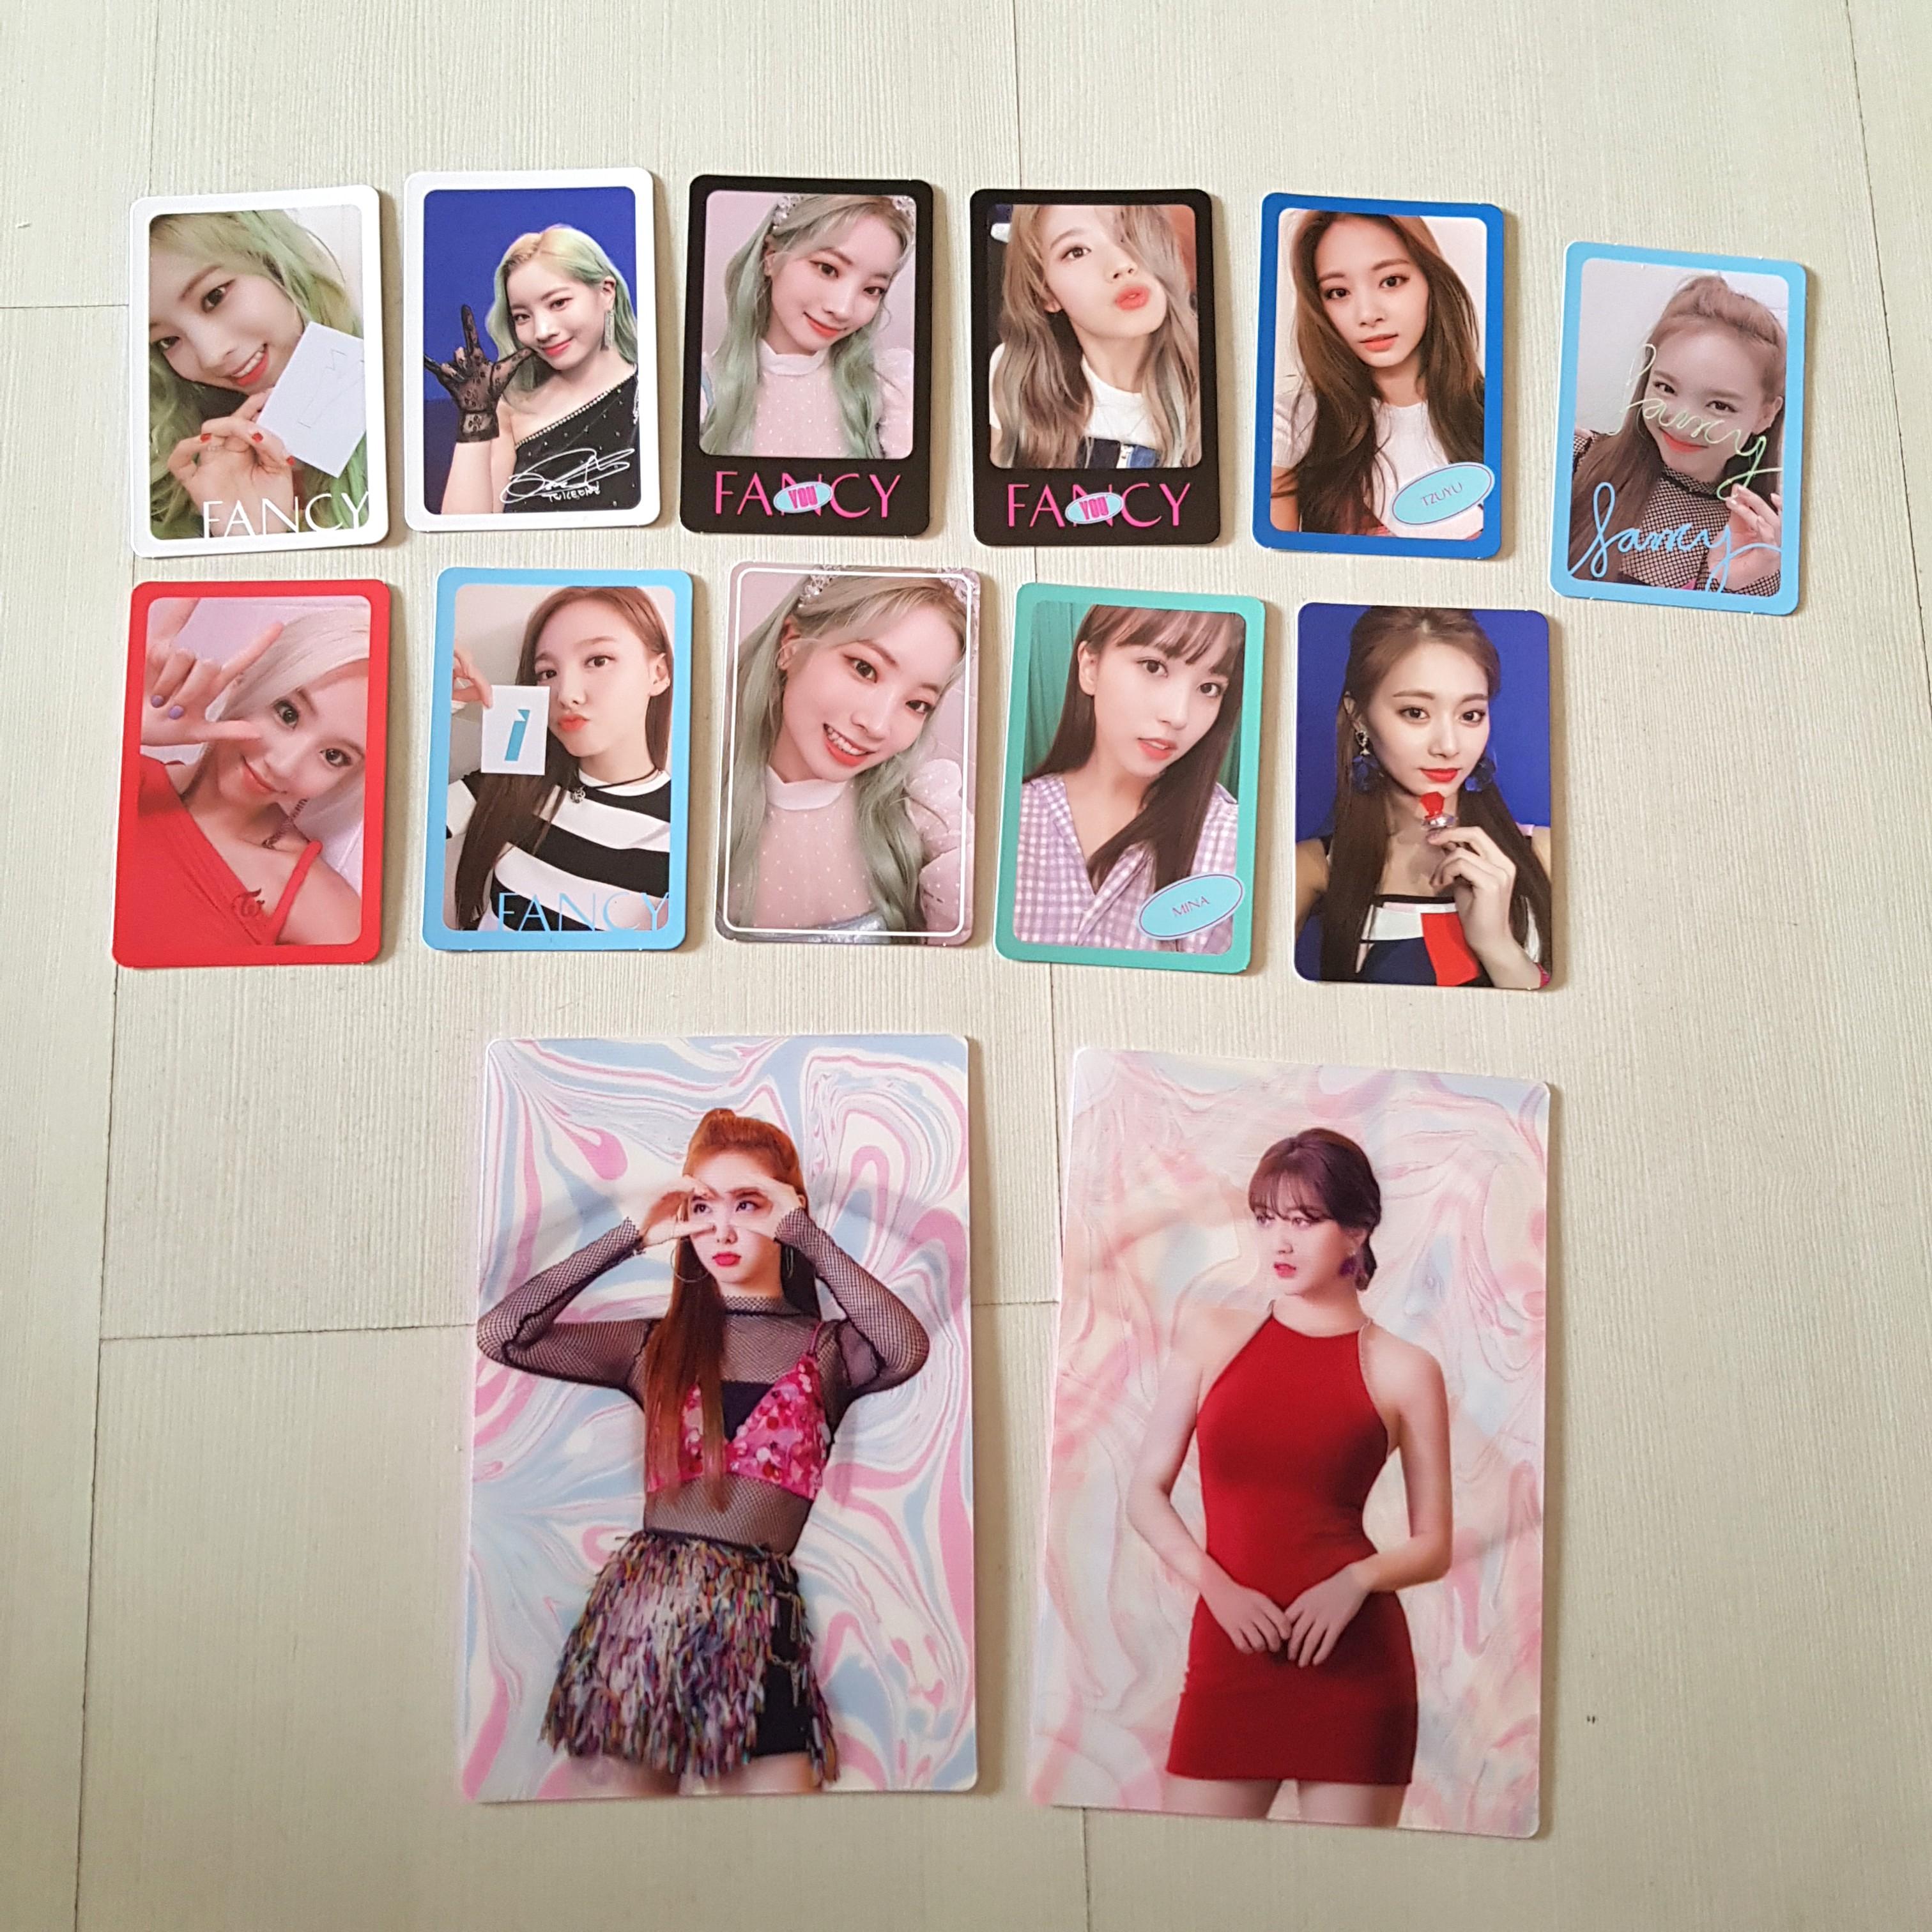 Wts Wtt Twice Fancy You Album Hobbies Toys Memorabilia Collectibles K Wave On Carousell